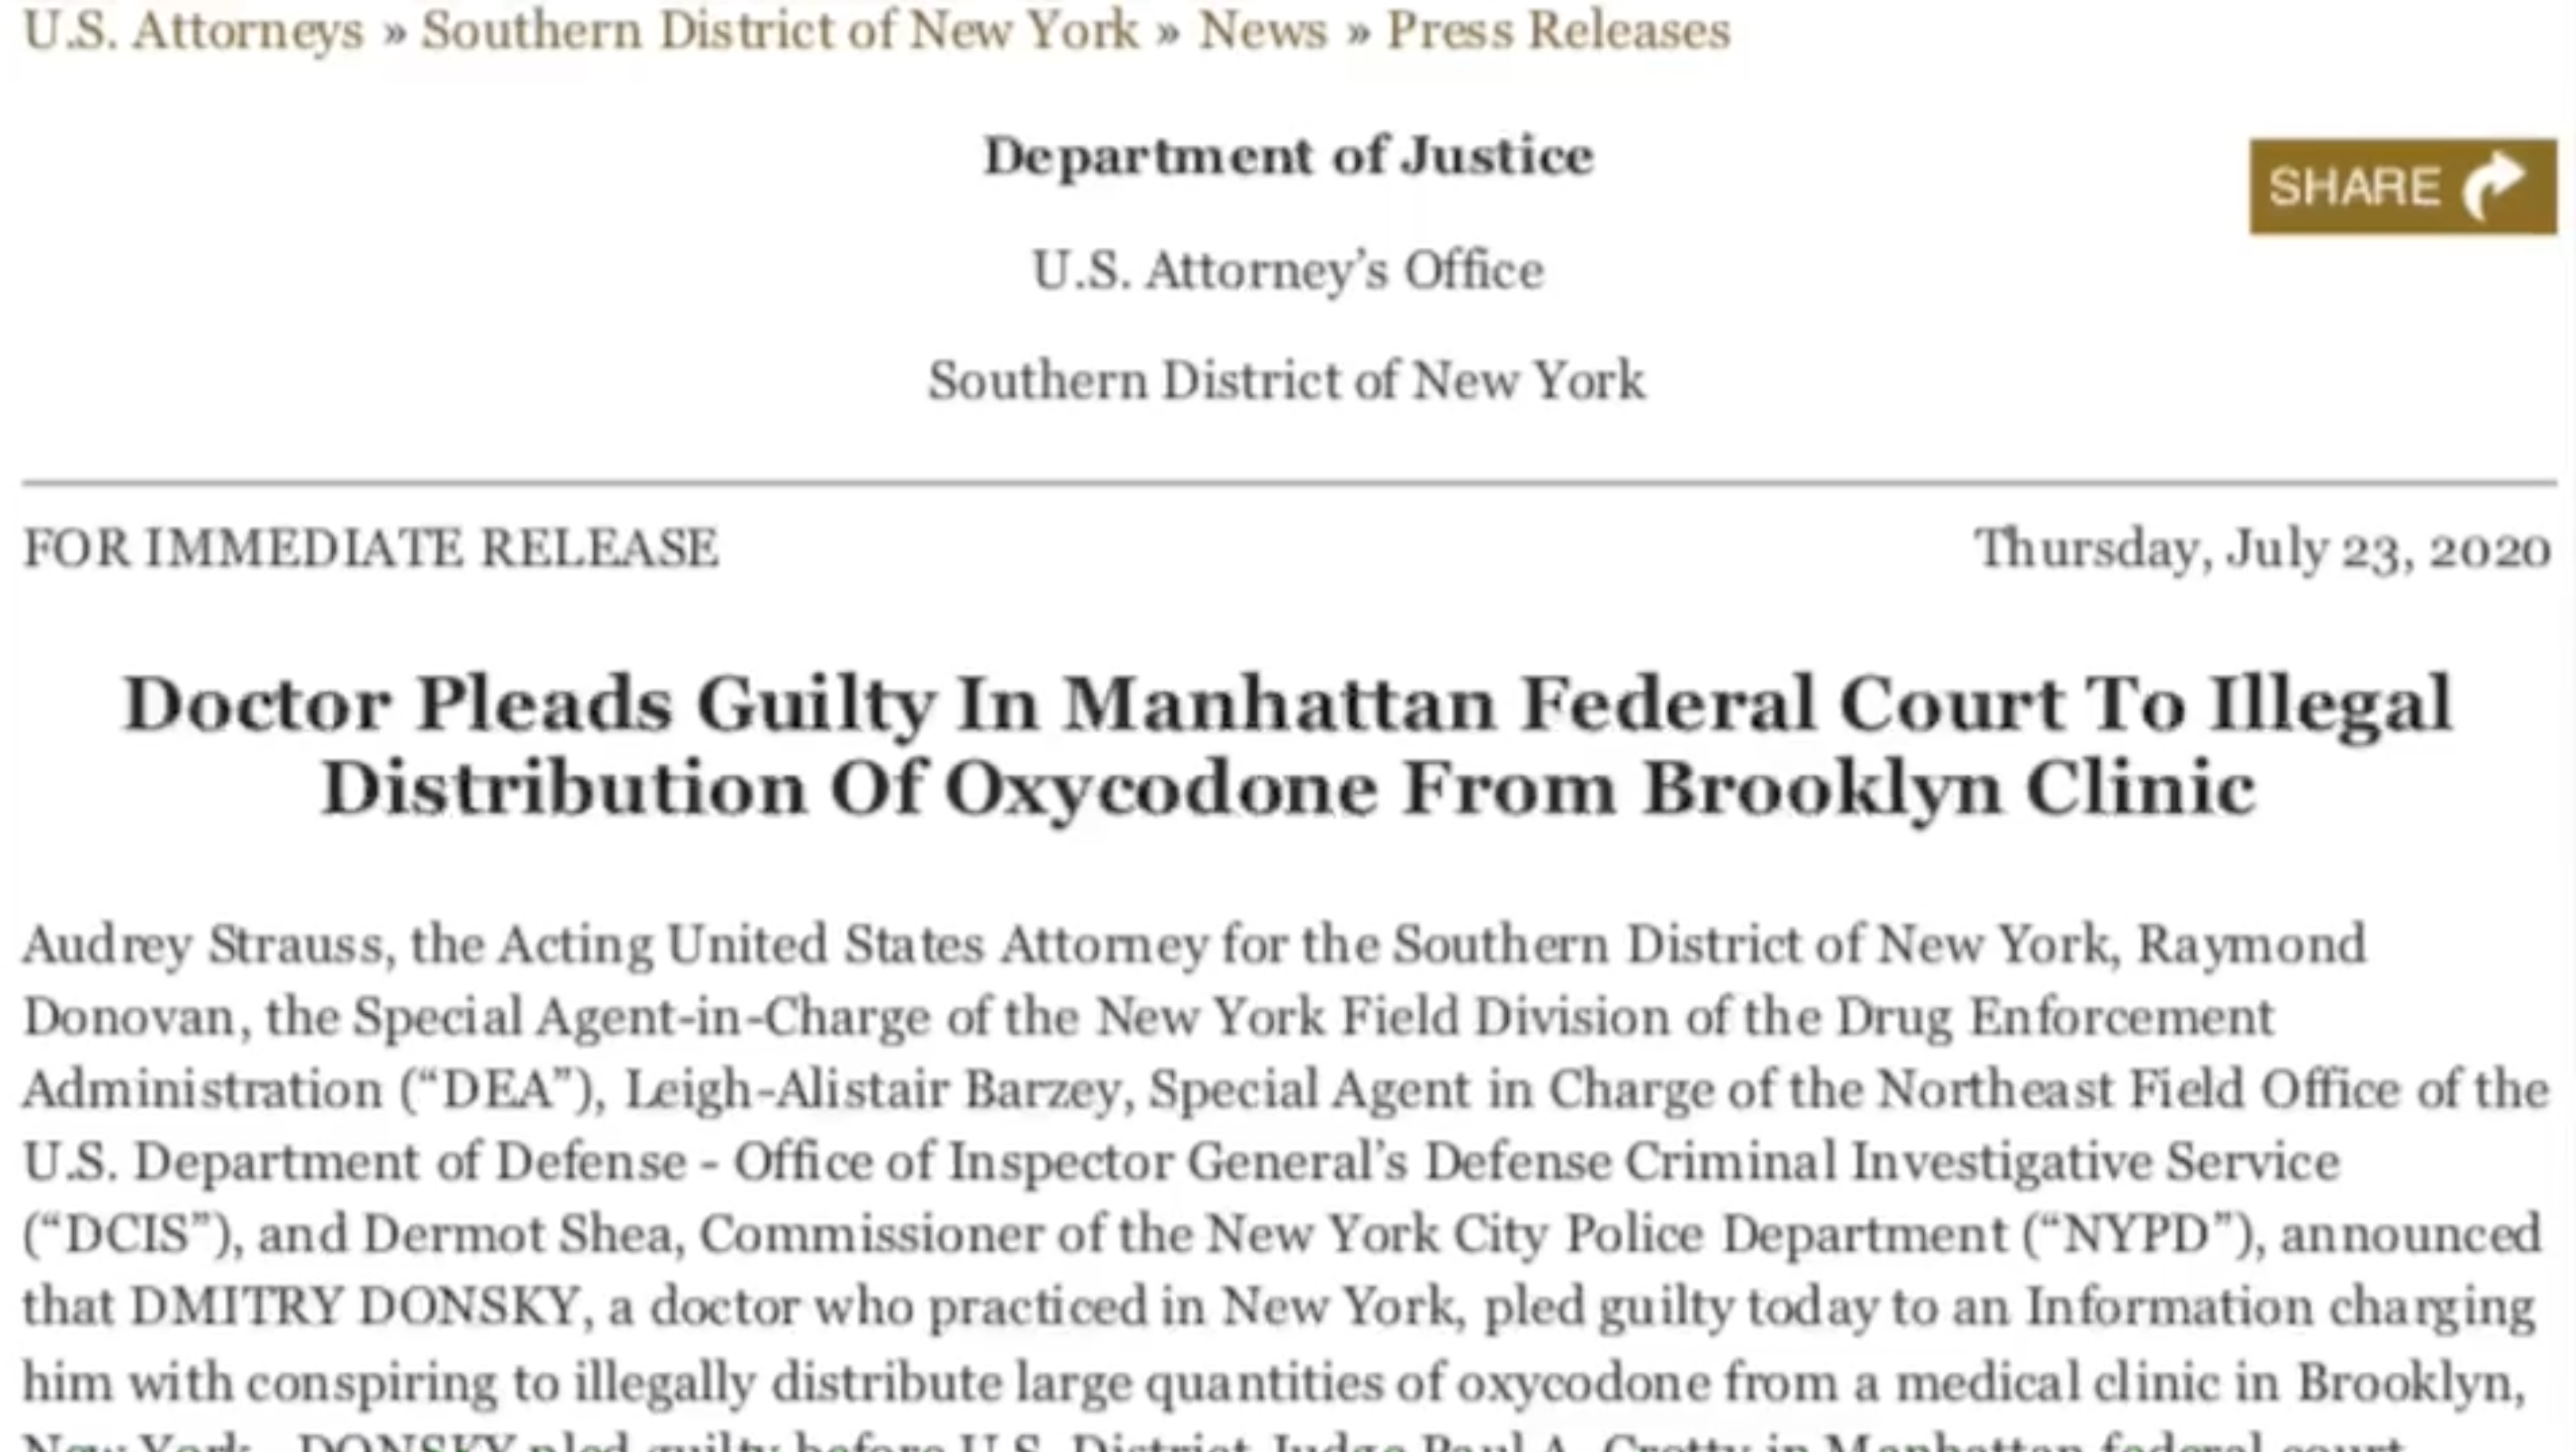 Doctor pleads guilty in Manhattan federal court to illegal distribution of oxycodone from Brooklyn clinic